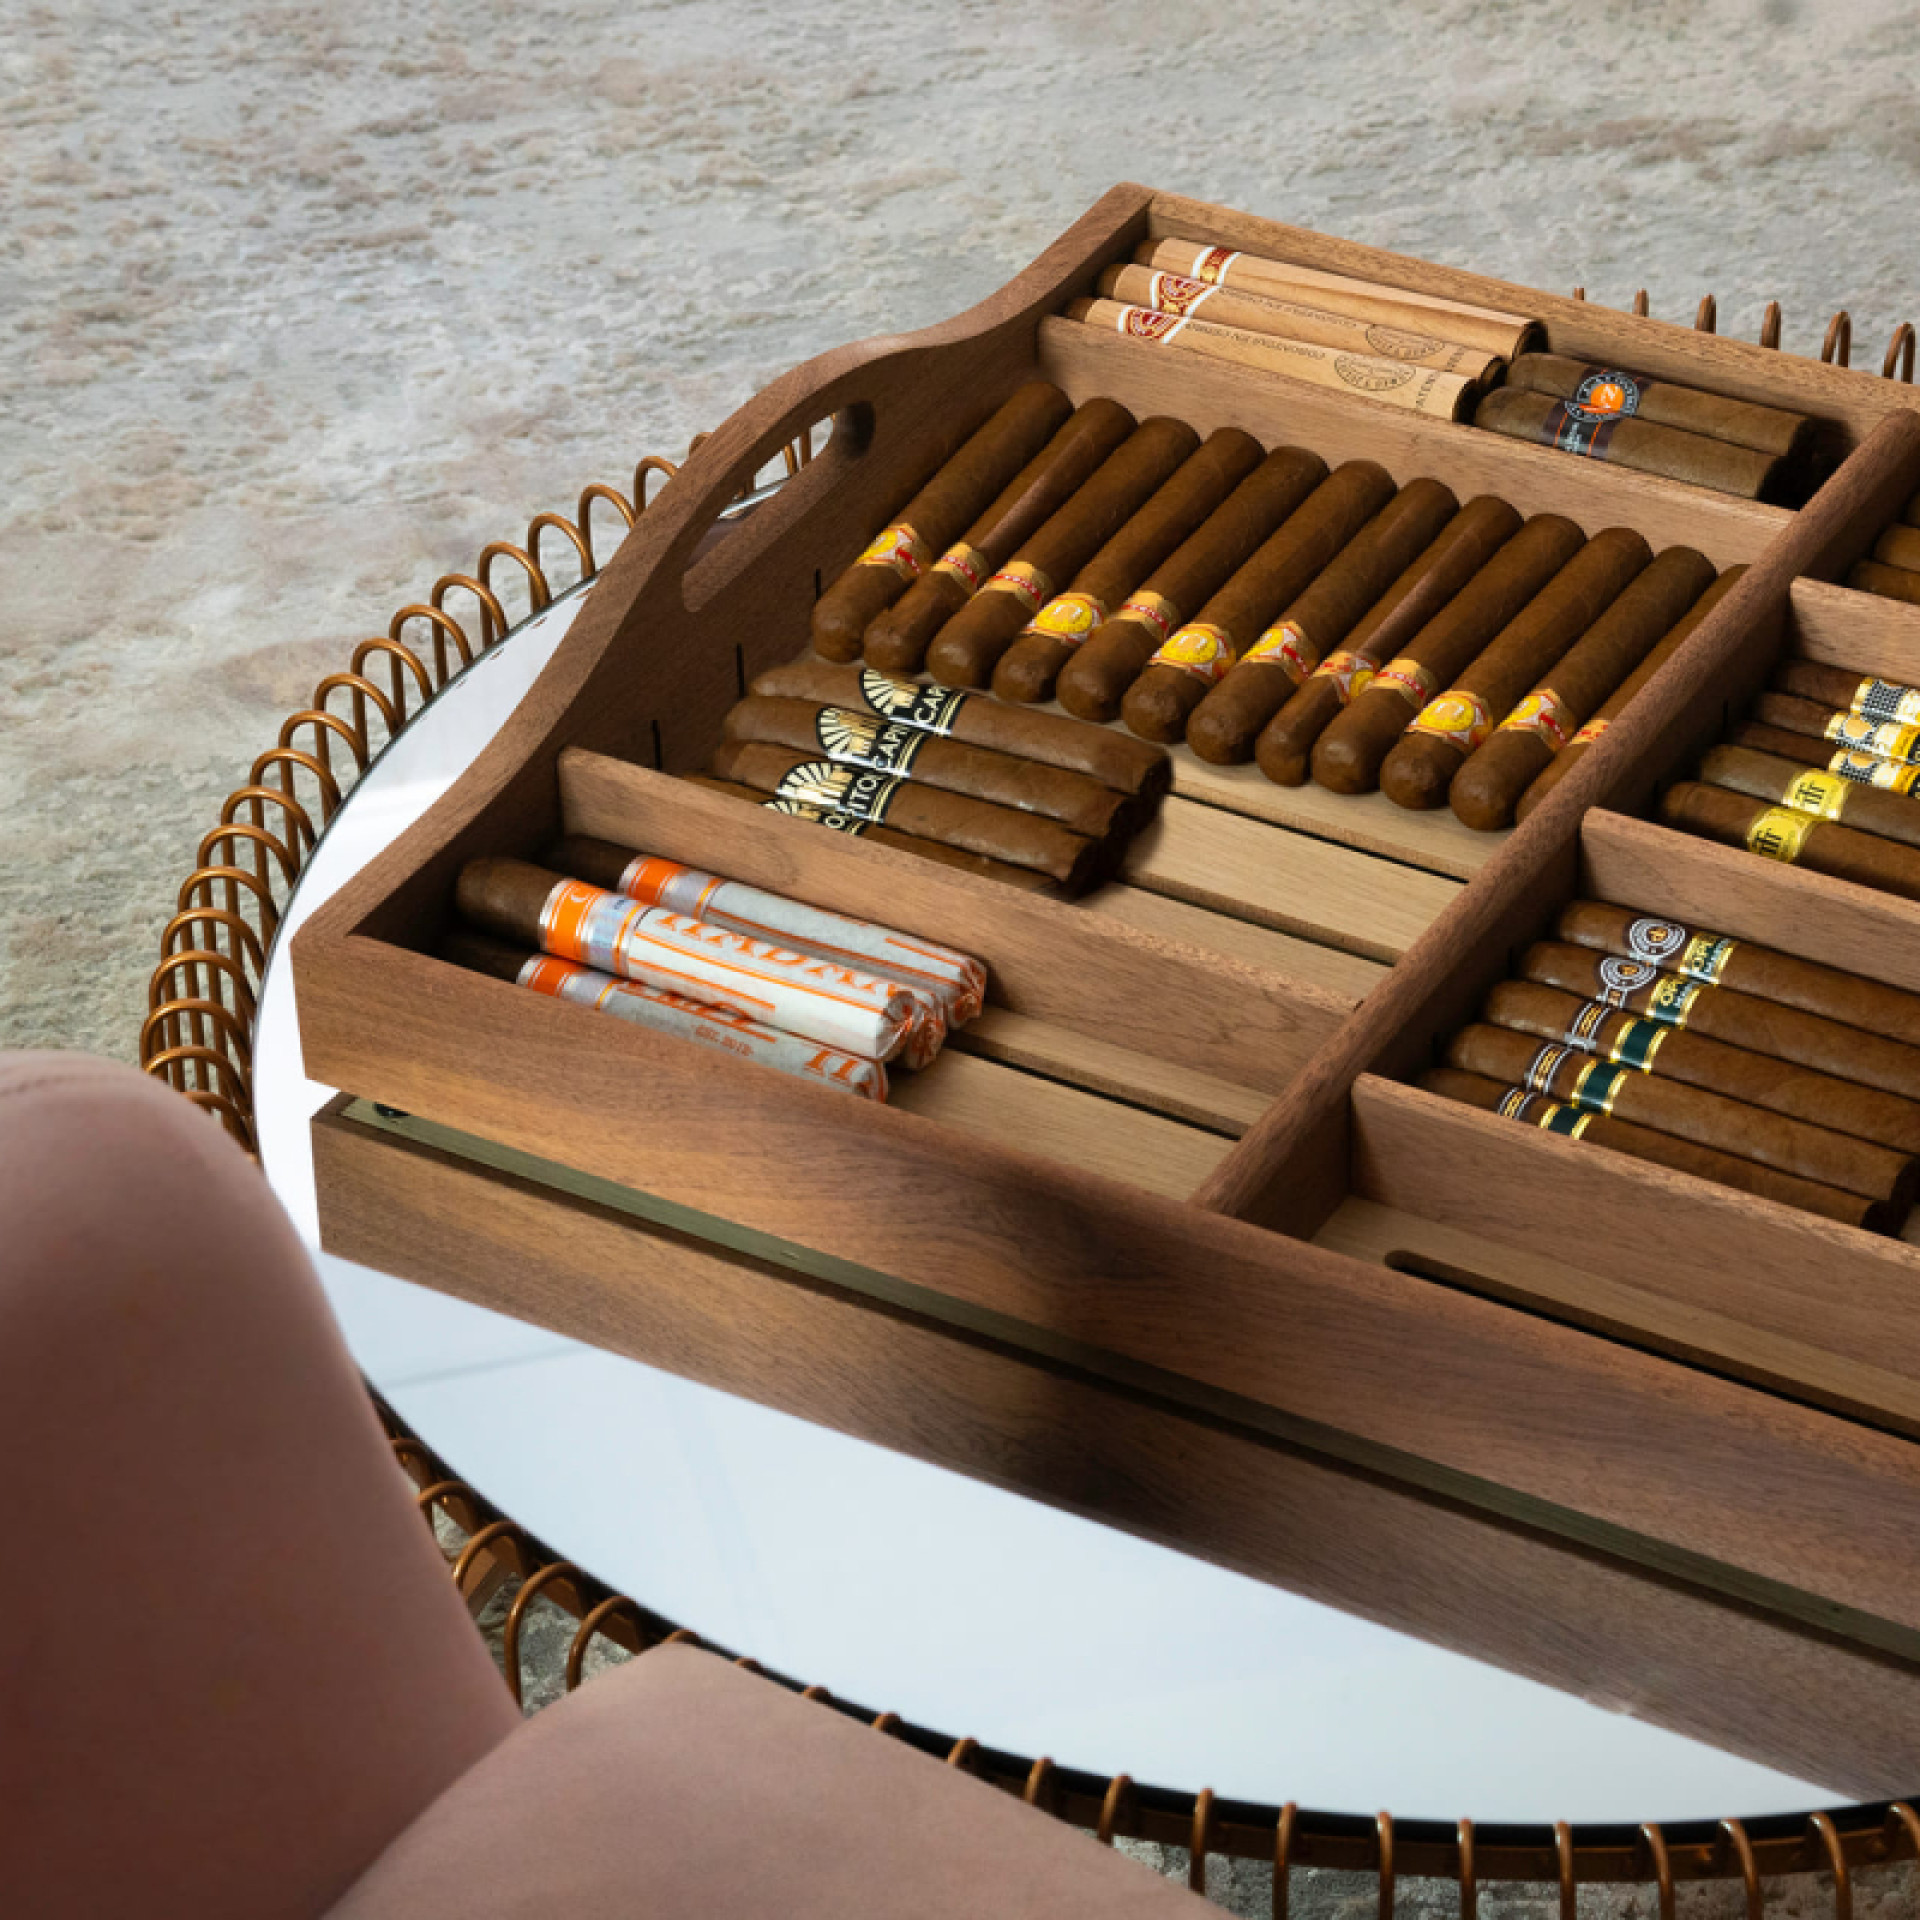 Sliding shelf and removable cigar serving tray. A beautiful presentation of cigars to share with your guests.